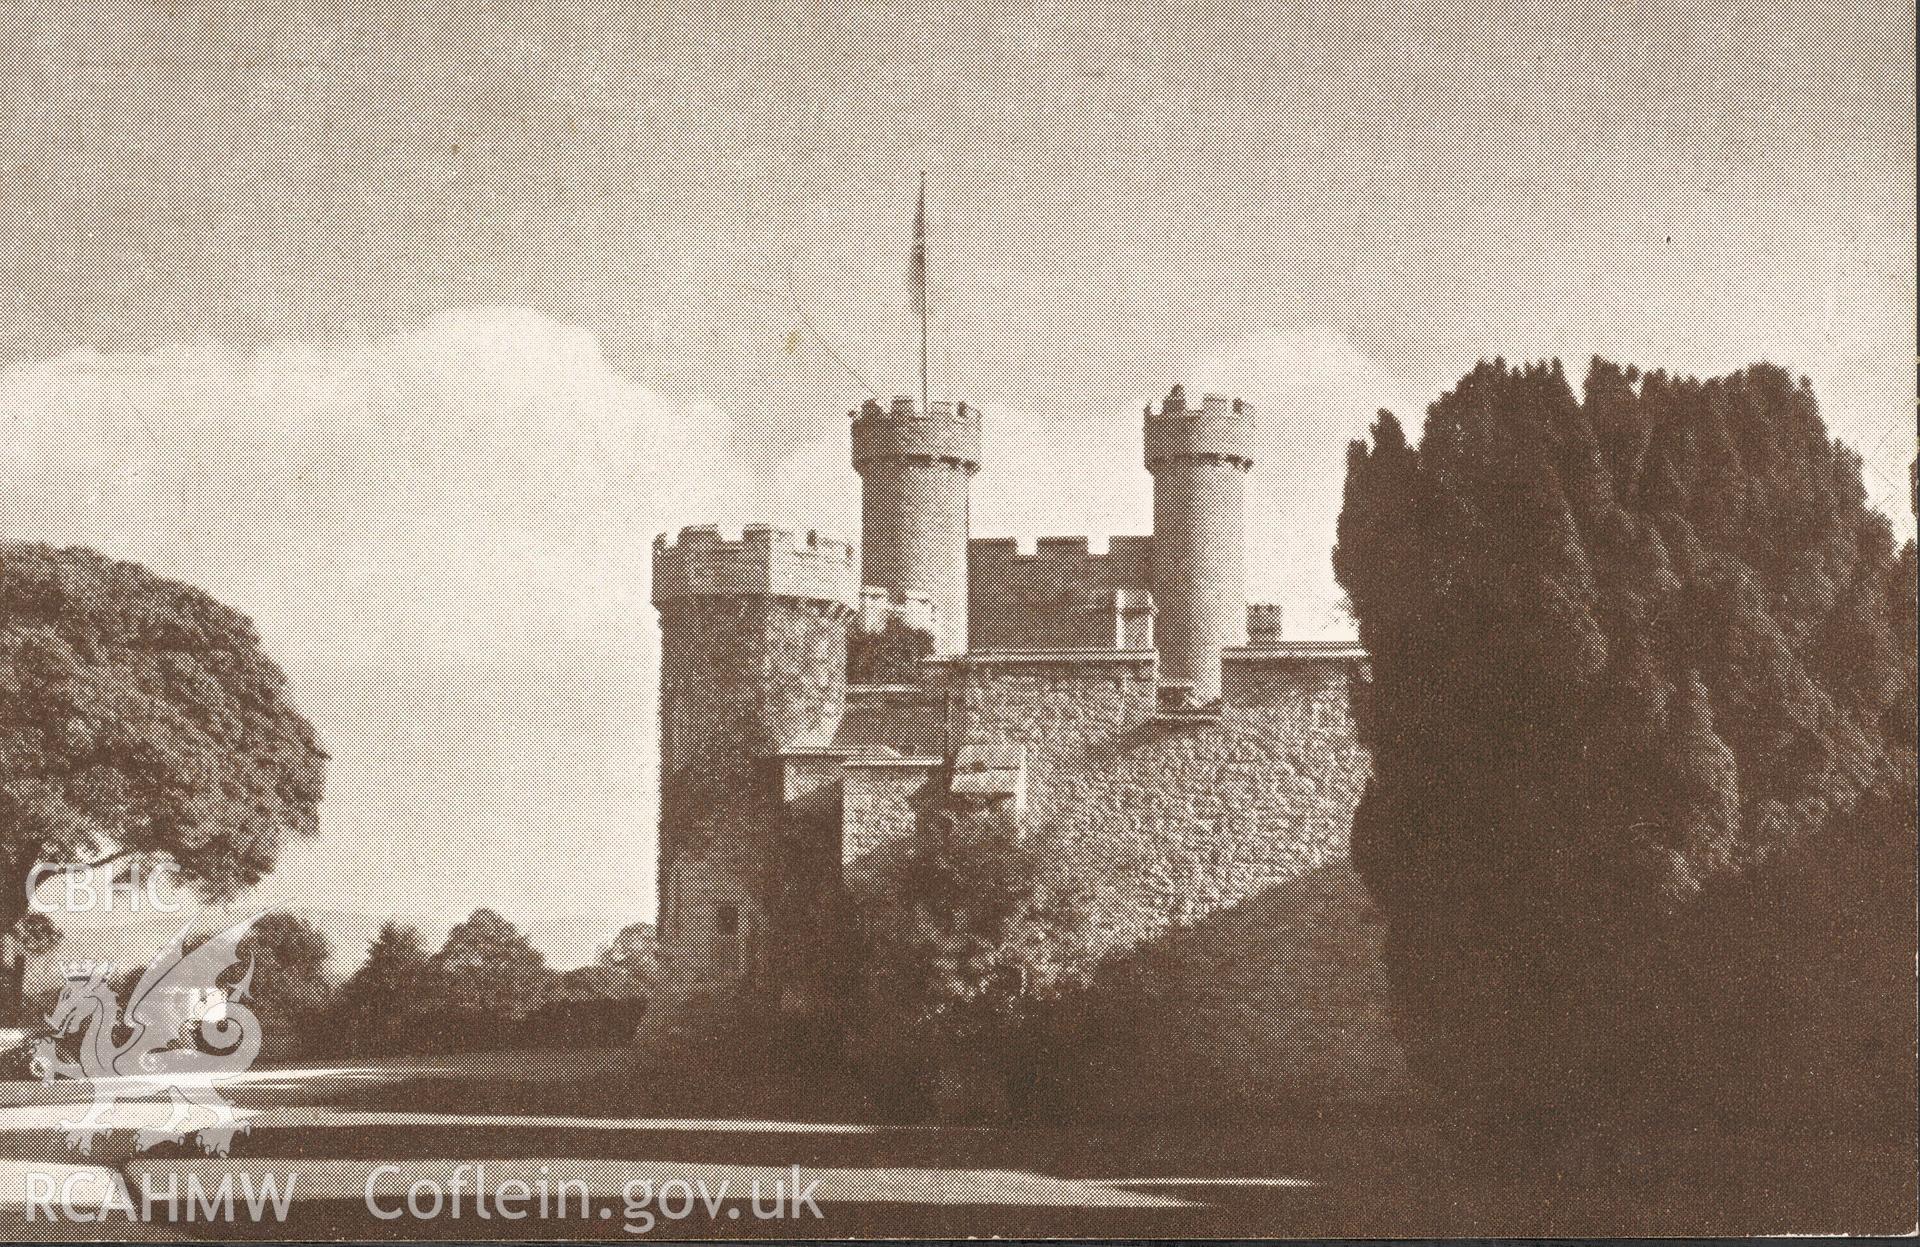 Digitised postcard image of Bodelwyddan Castle / Lowther College. Produced by Parks and Gardens Data Services, from an original item in the Peter Davis Collection at Parks and Gardens UK. We hold only web-resolution images of this collection, suitable for viewing on screen and for research purposes only. We do not hold the original images, or publication quality scans.